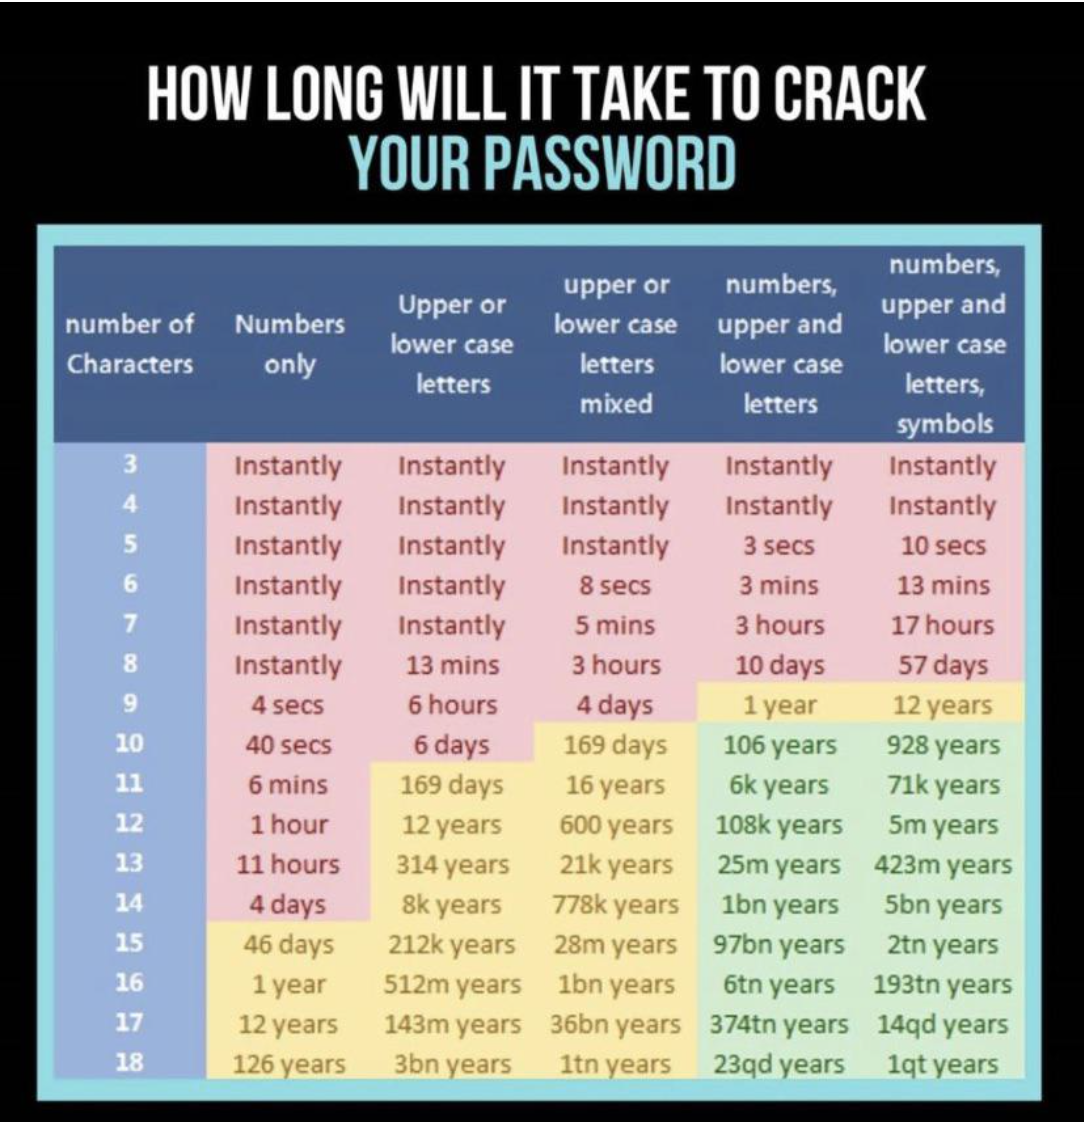 A chart for password crack-ability